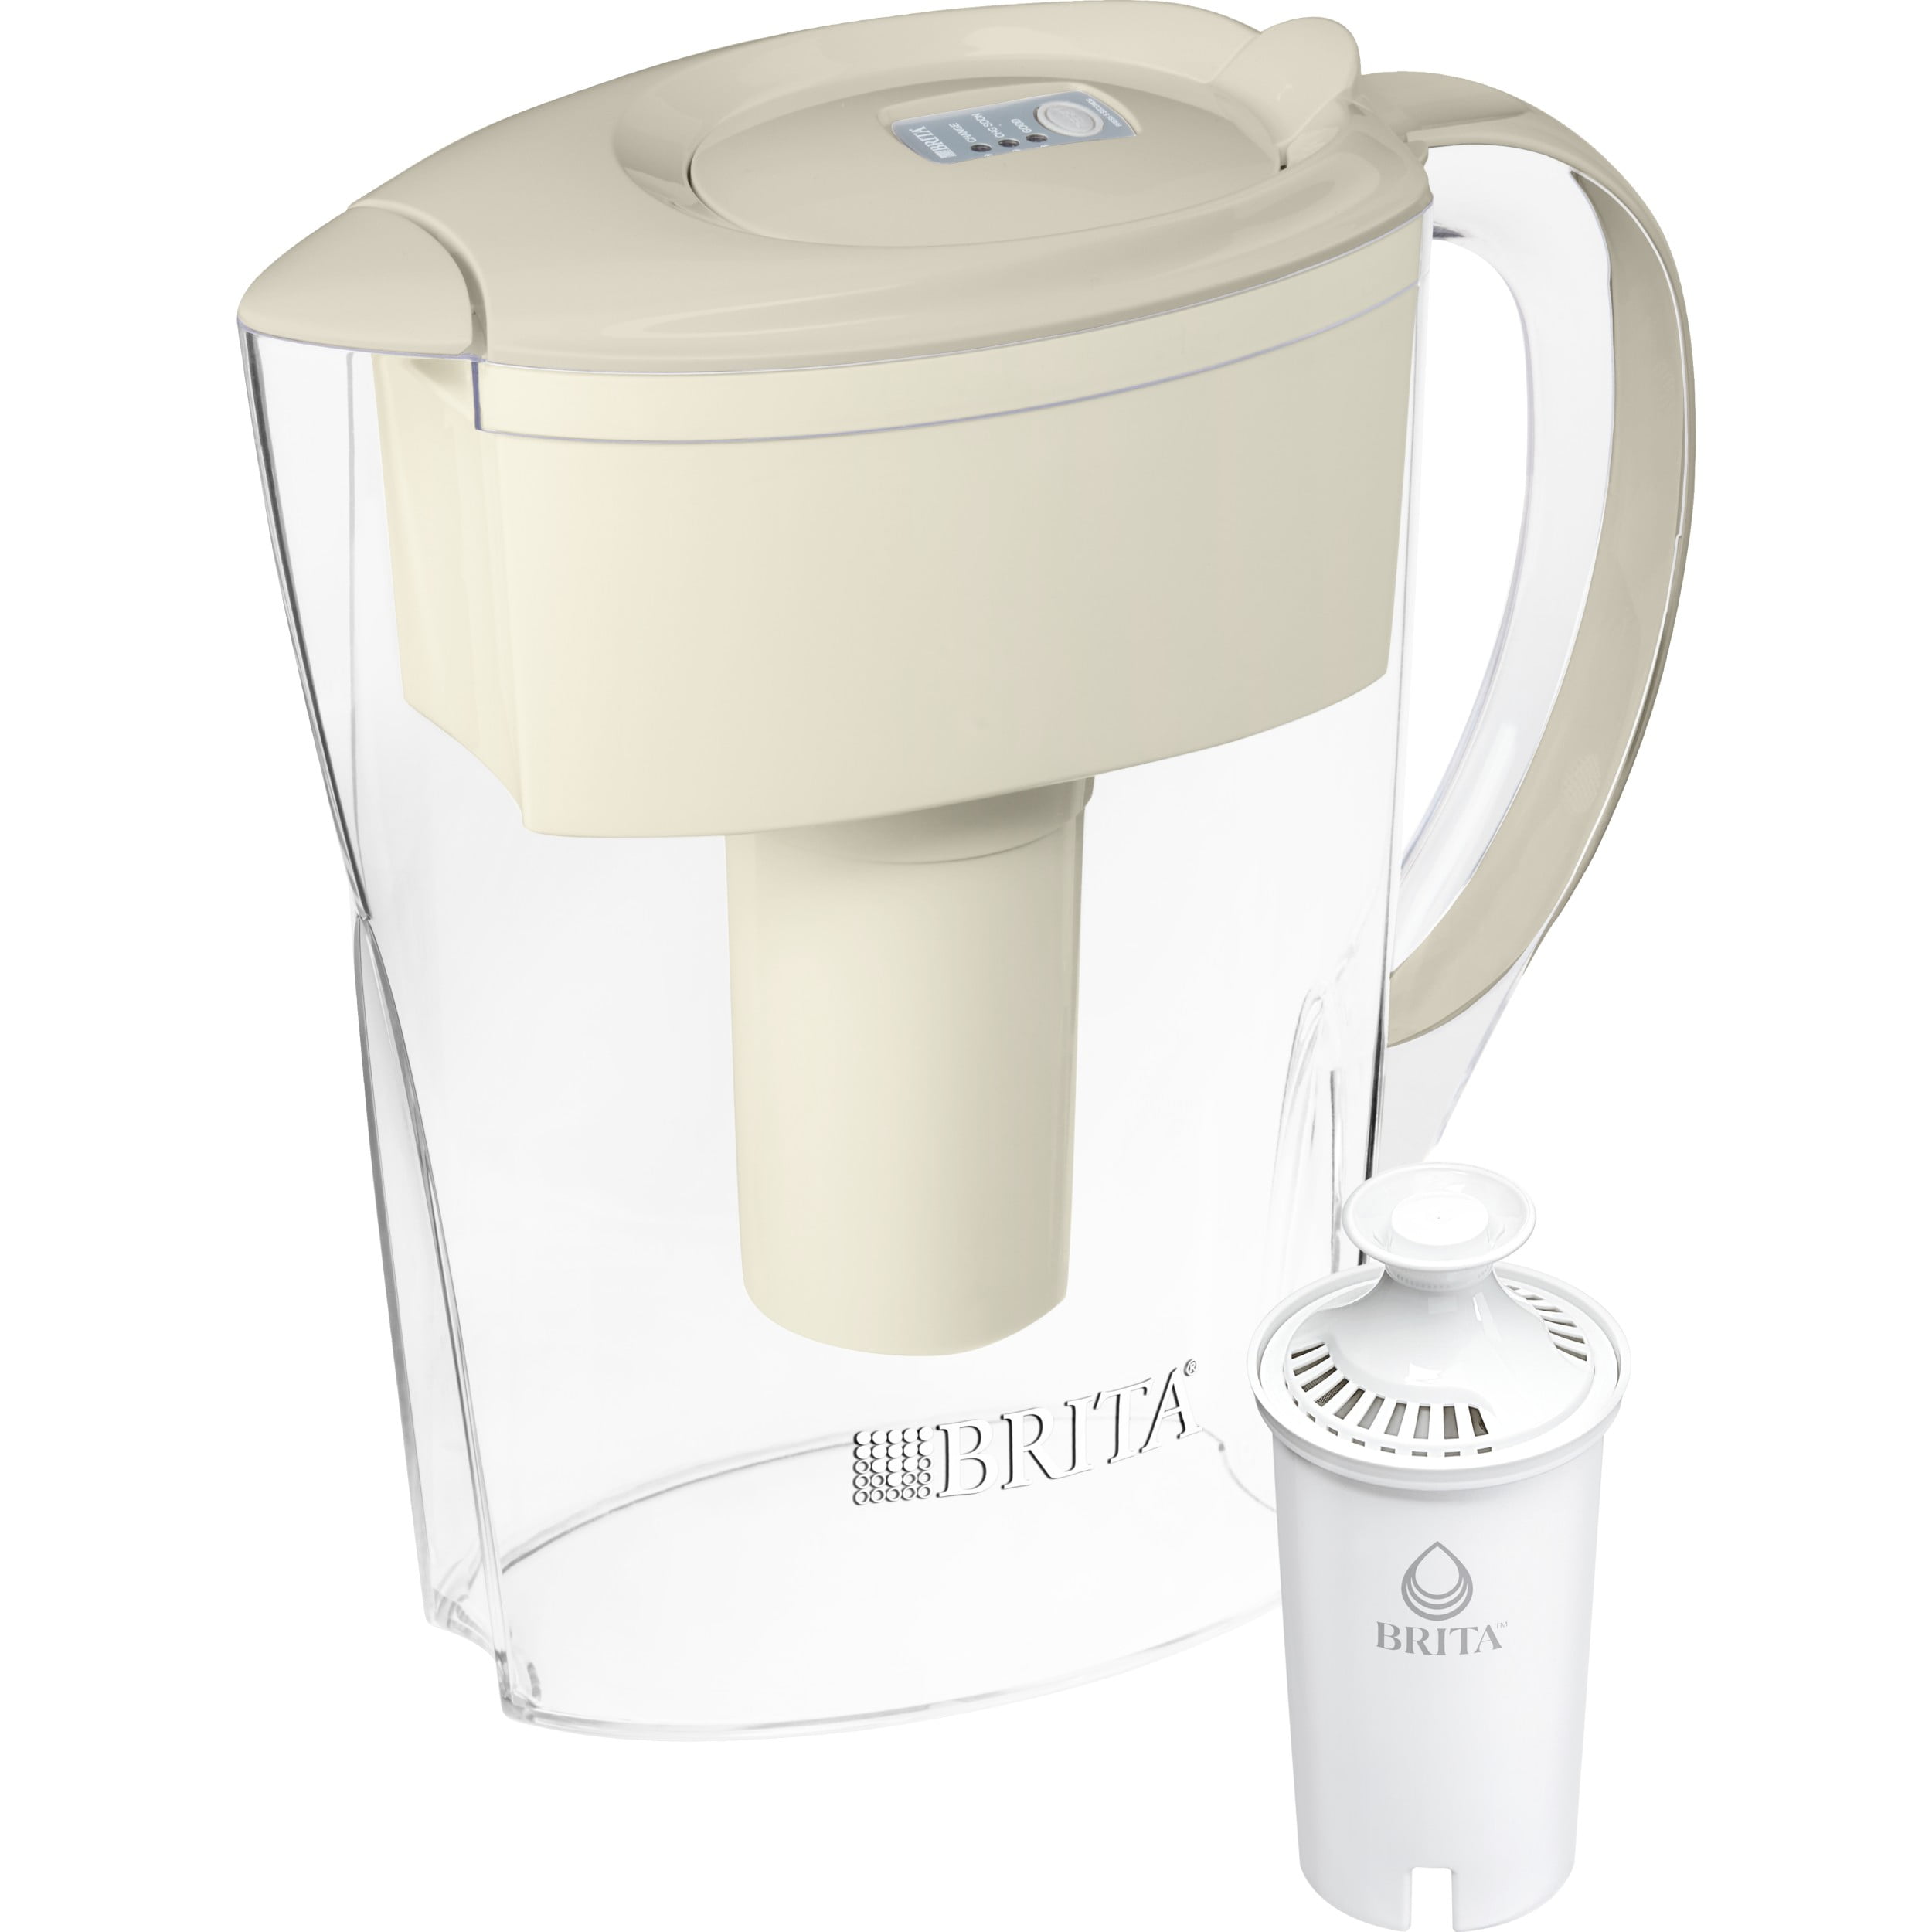 Brita Small 6 Cup Space Saver Water Filter Pitcher with 1 Standard Filter, Space Saver, Almond